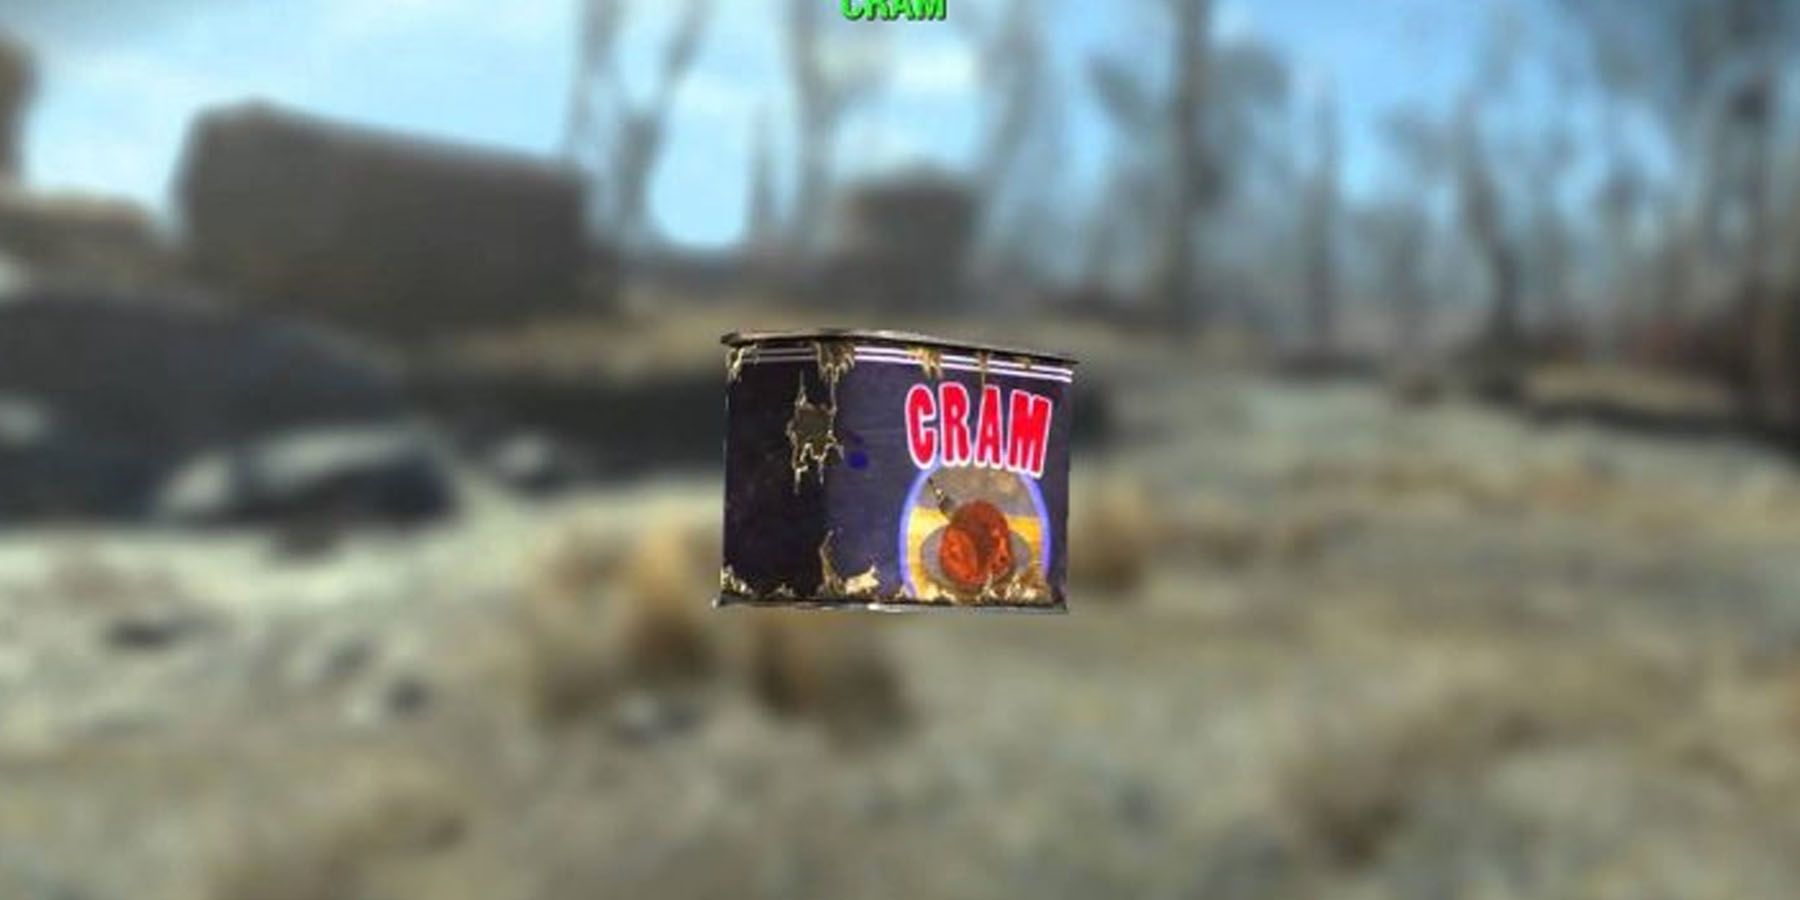 A canned good in Fallout 76